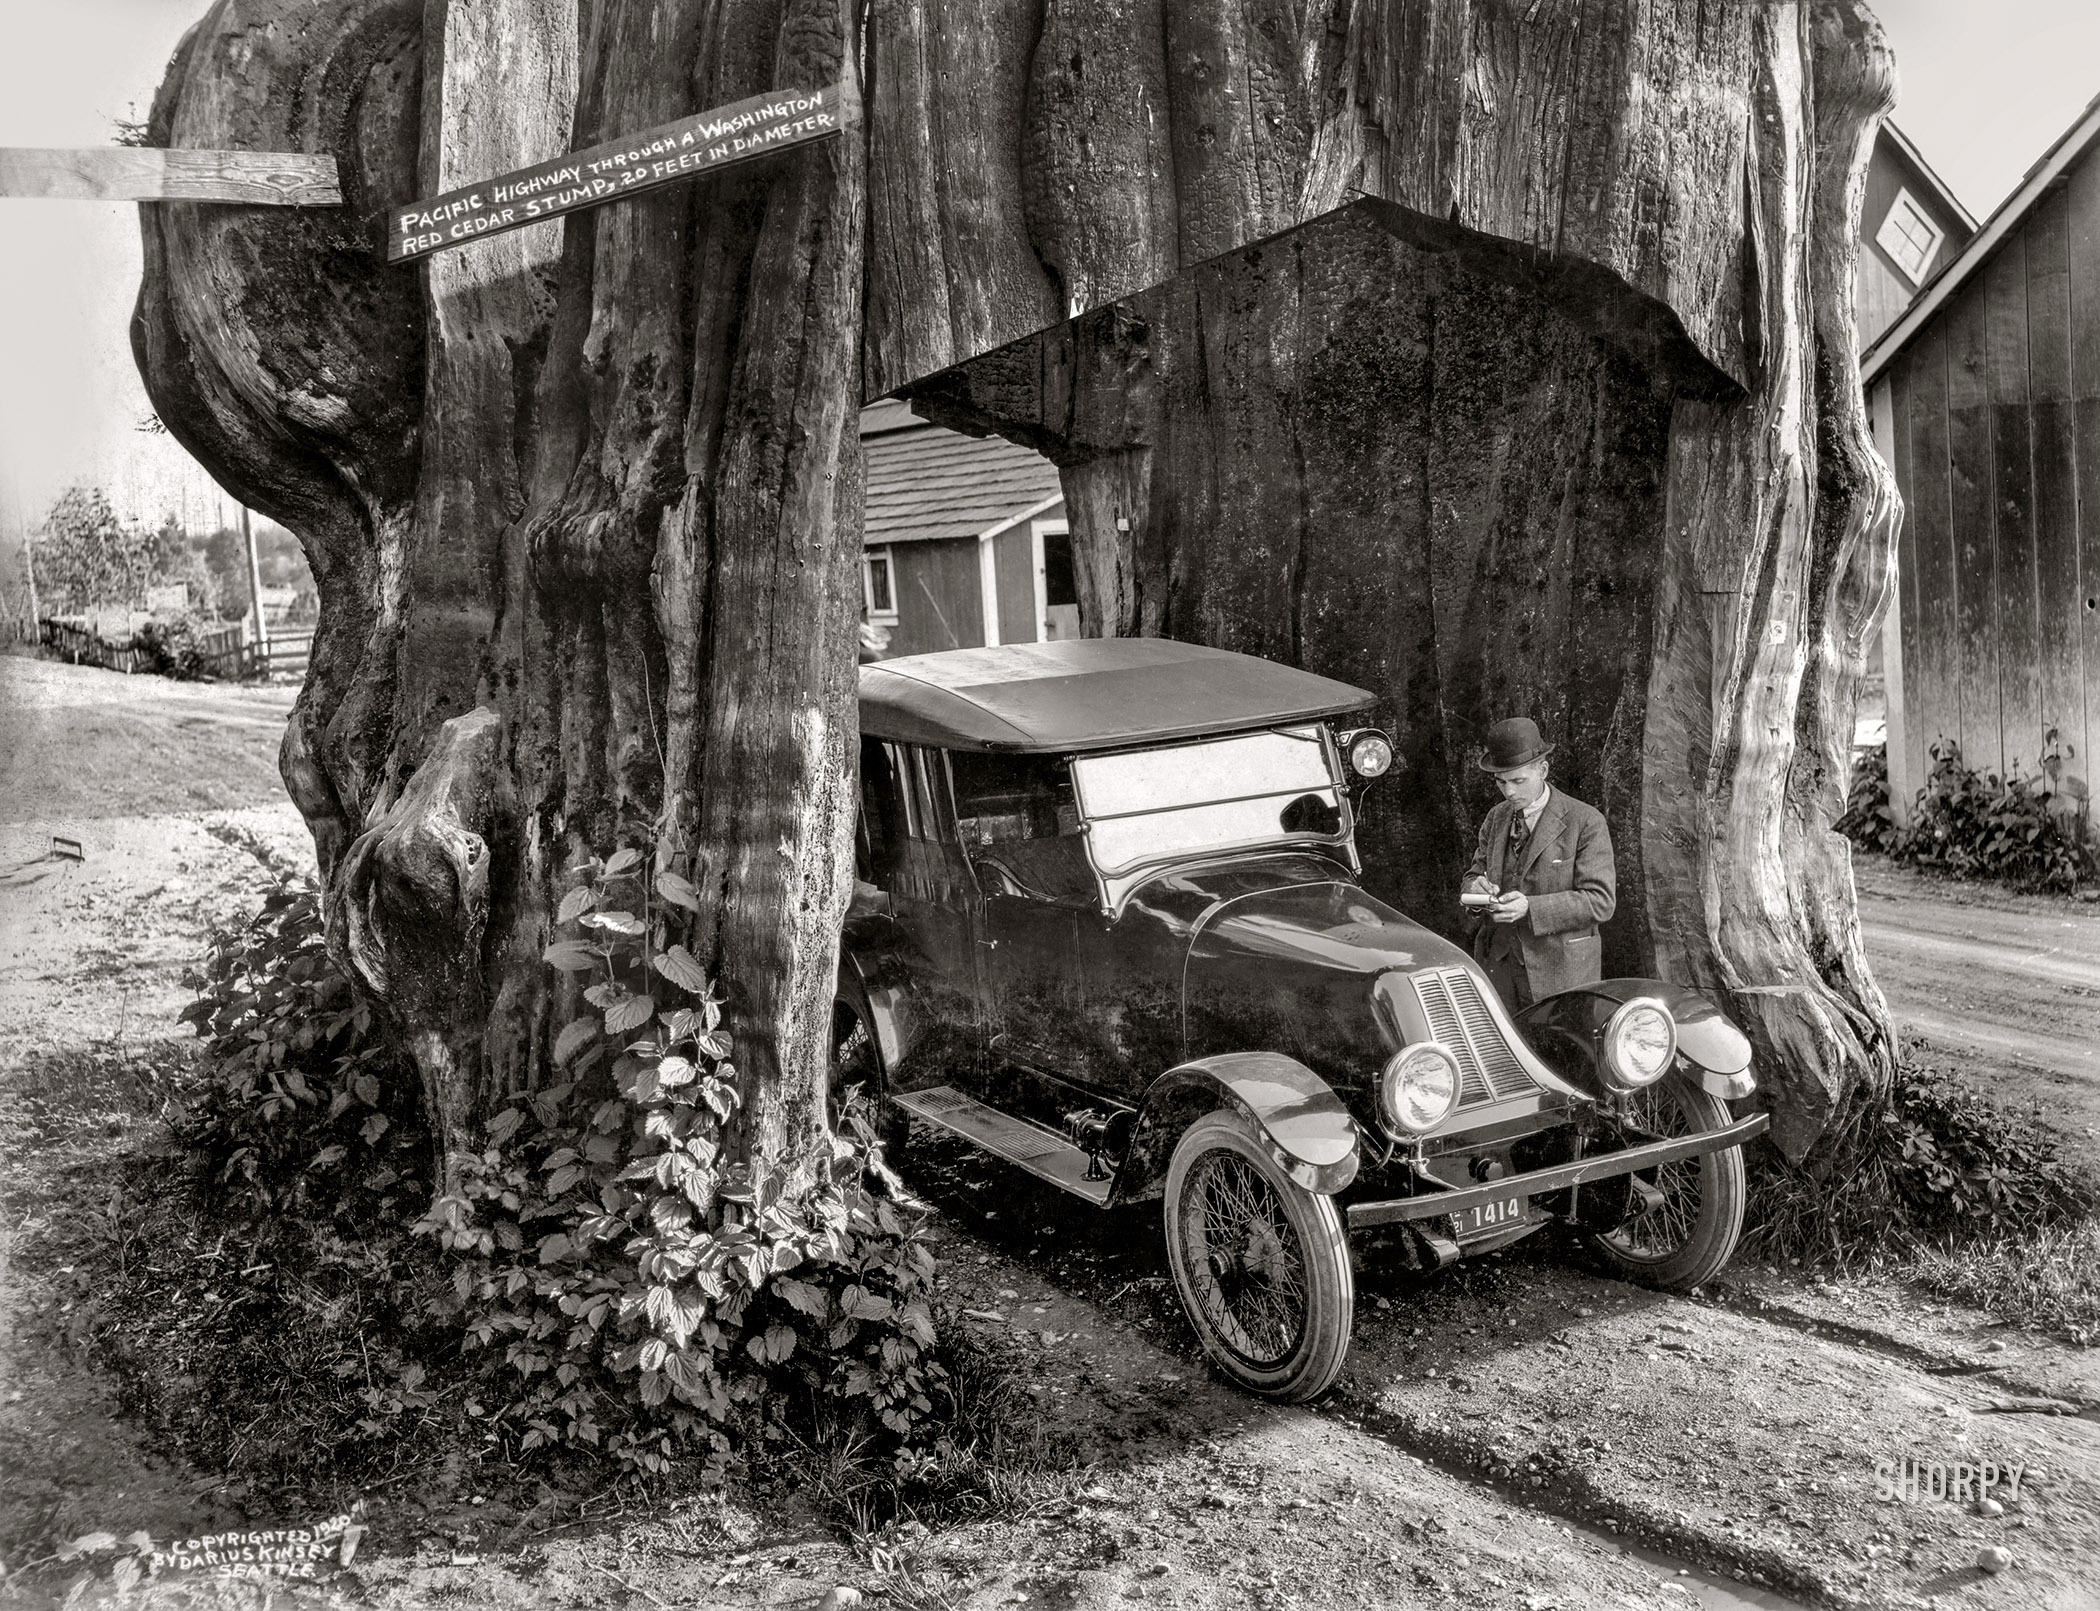 1920. "Pacific Highway through a Washington red cedar stump, 20 feet in diameter (man and automobile in tunnel of giant tree stump)." Photo by Darius Kinsey, Seattle. View full size.